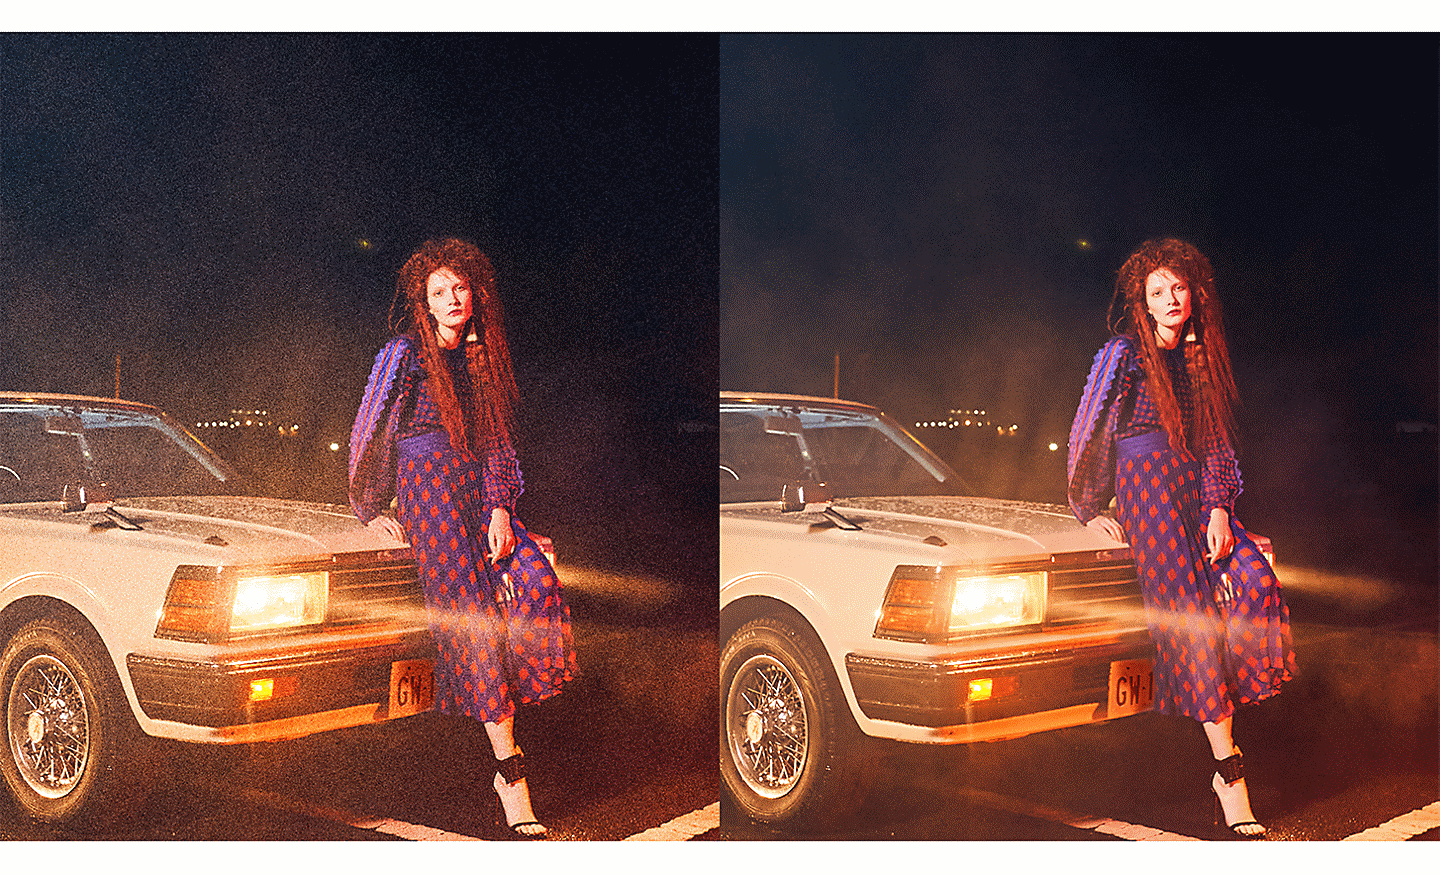 Two images of a woman leaning against car, one with less noise than the other.